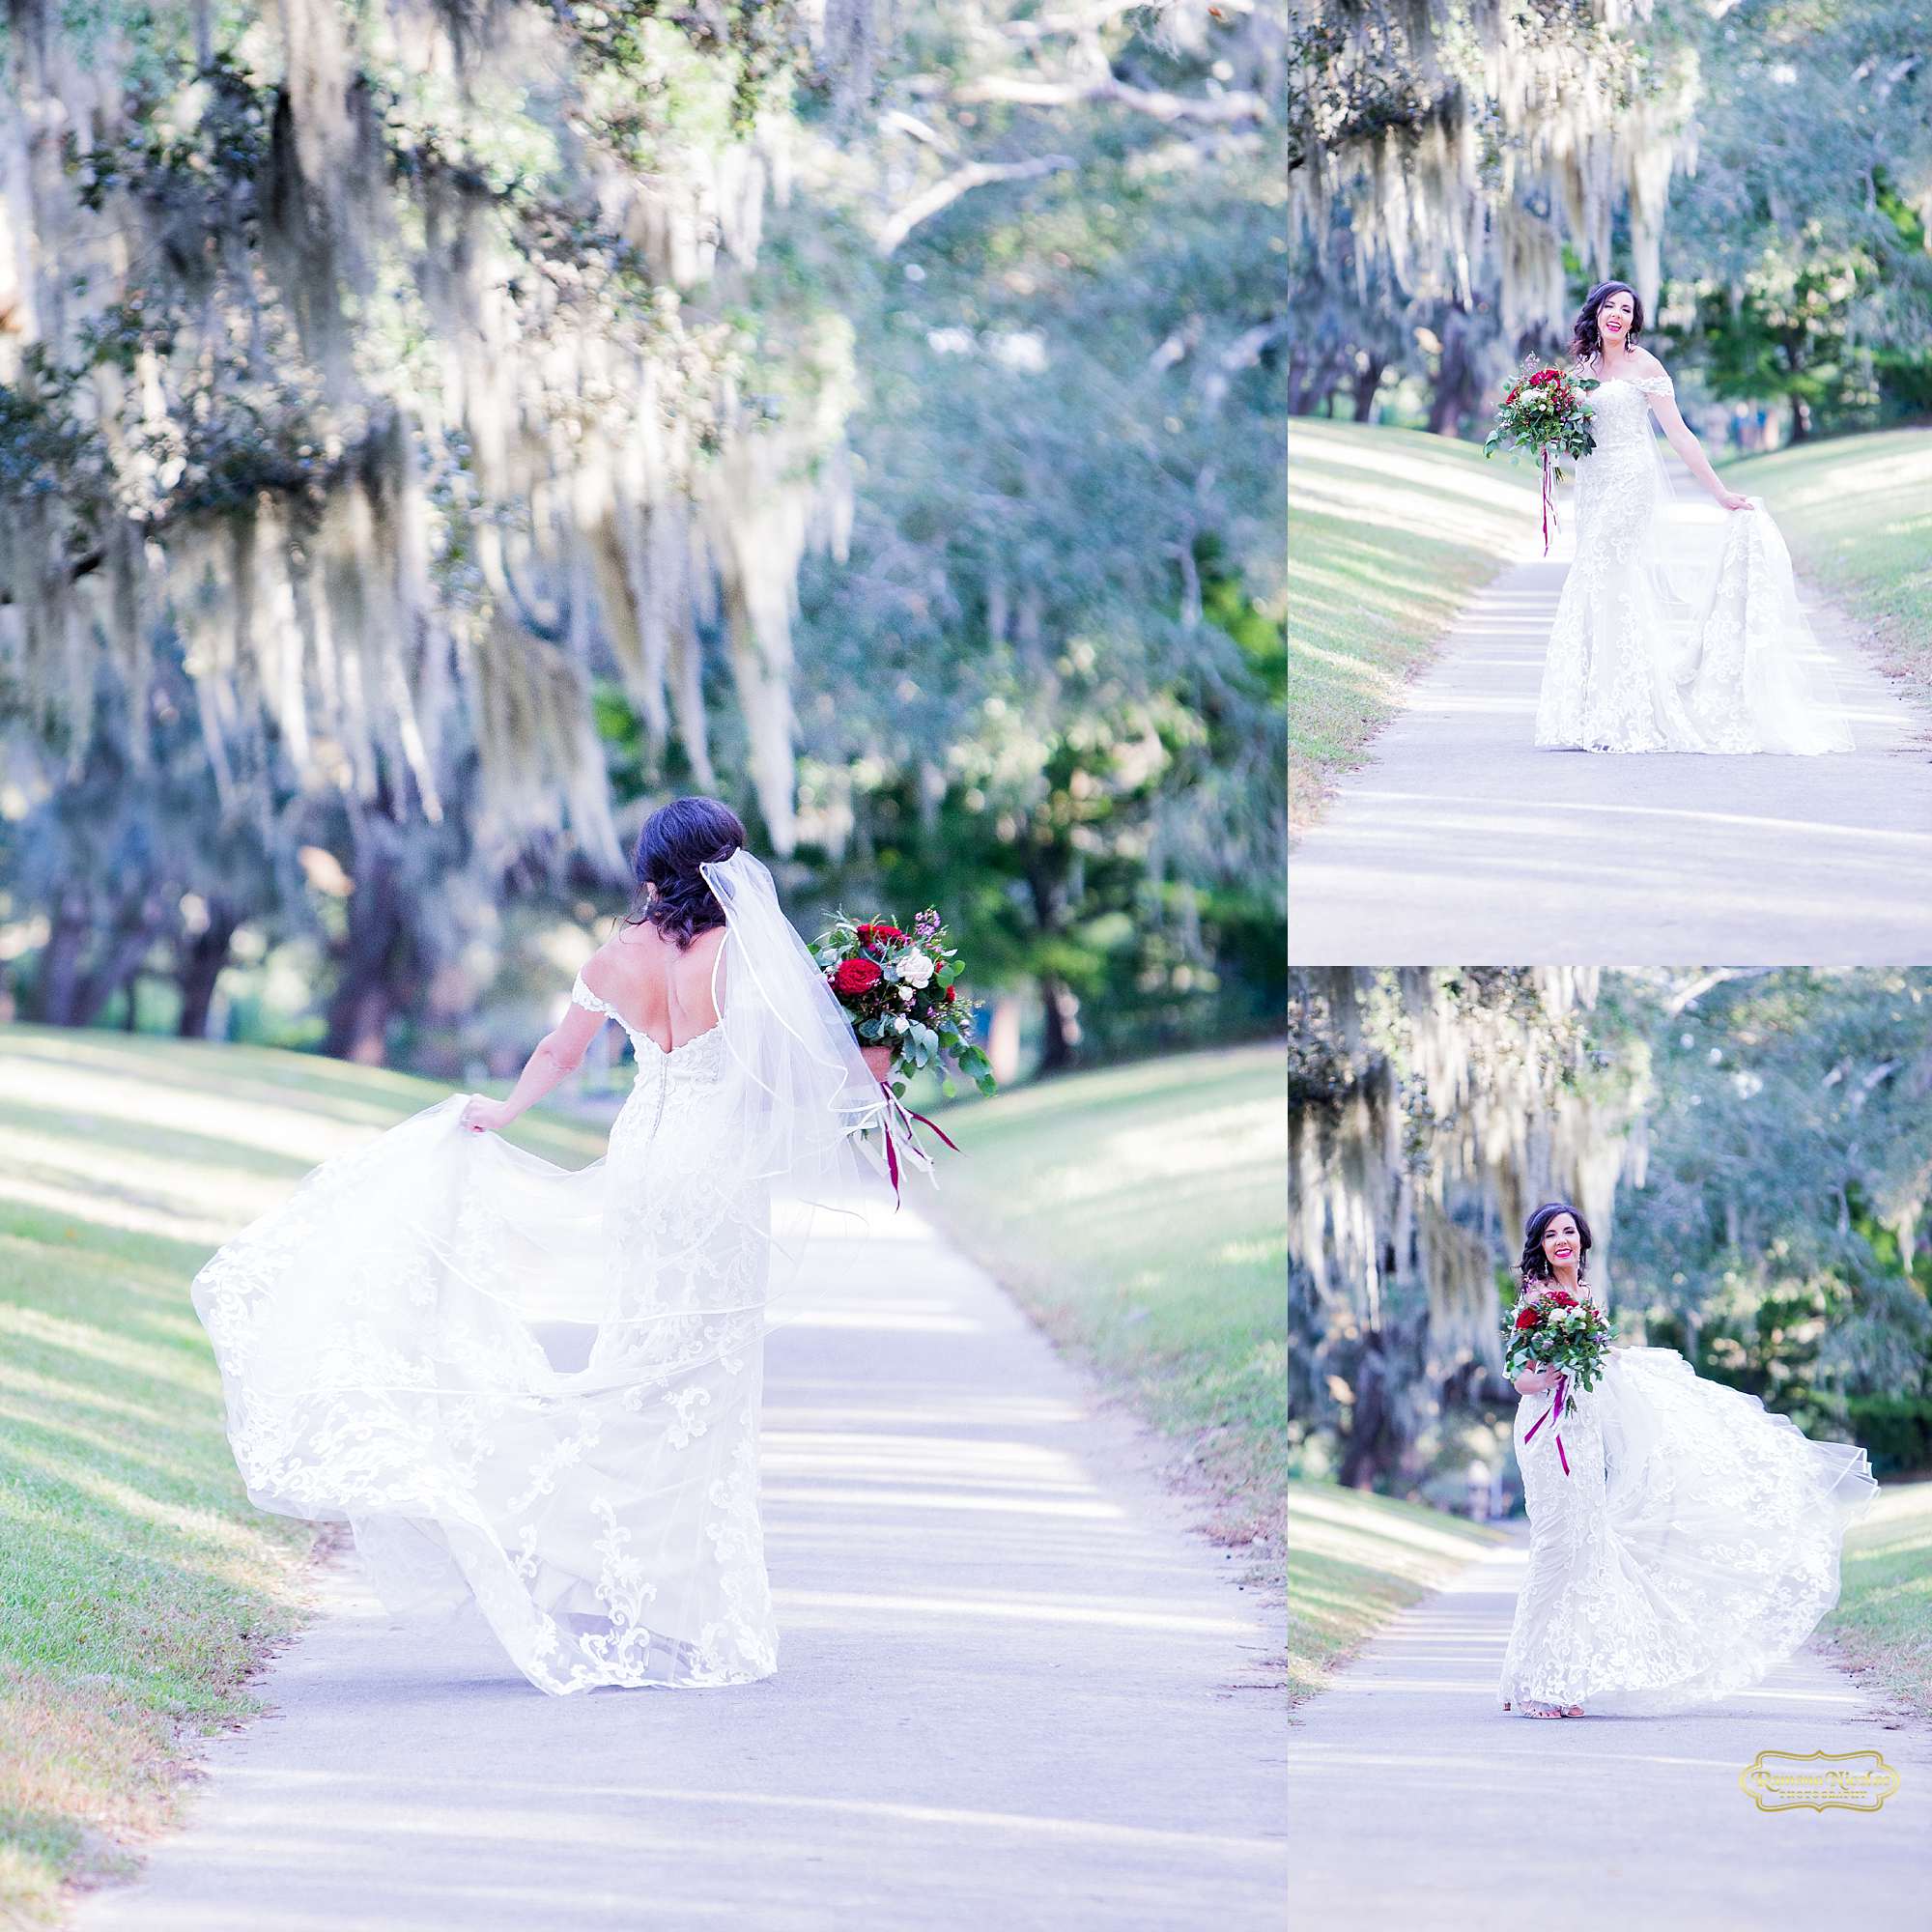 bride laughing and spinning twirling in her wedding dress with red flowers at brookgreen gardens by ramona nicolae photography myrtle beach wedding photographer-5.jpg